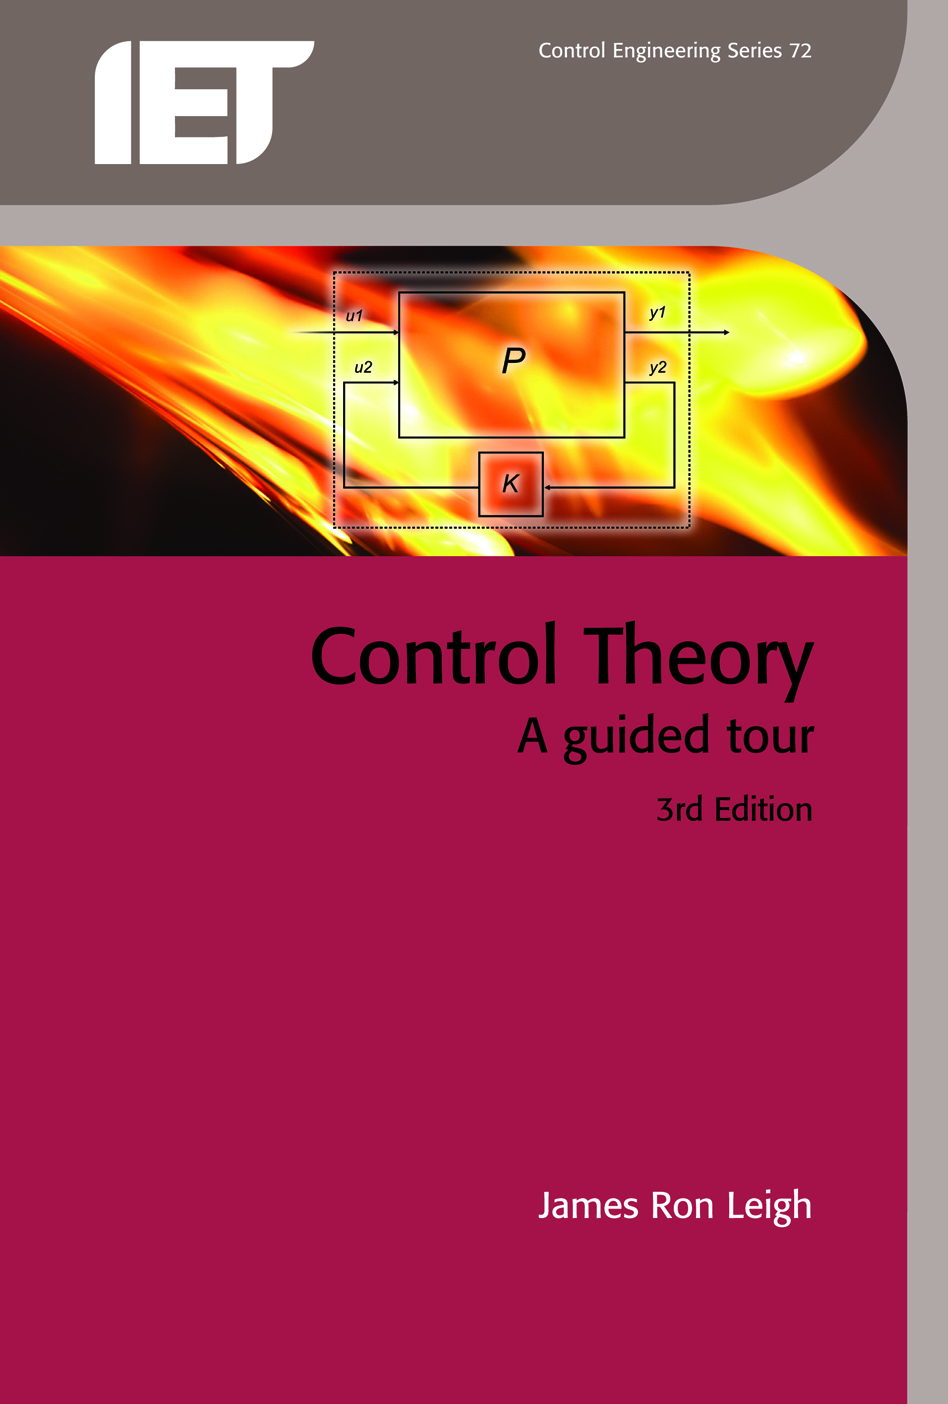 Control Theory, A guided tour, 3rd Edition